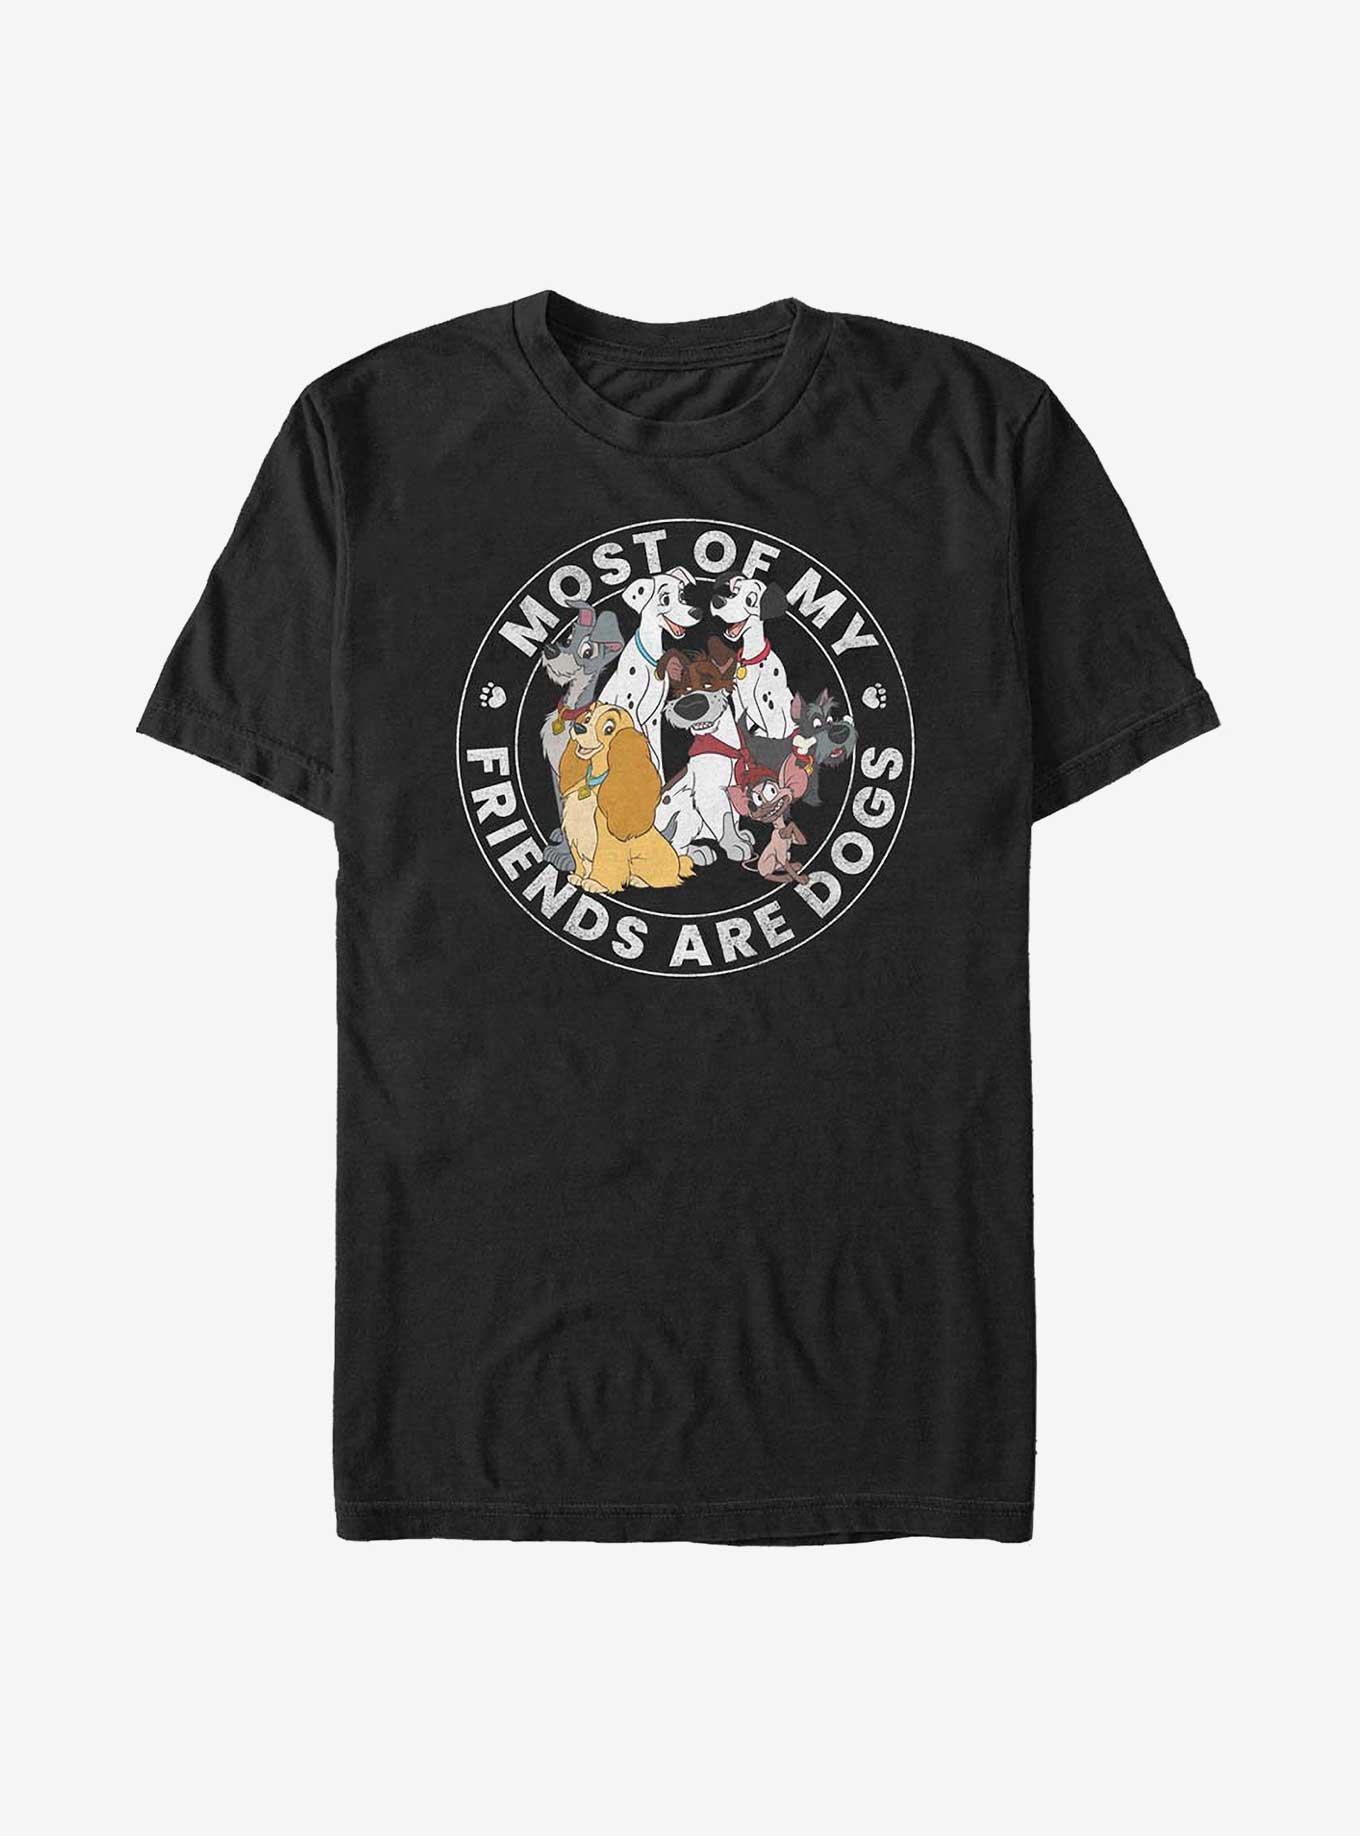 Disney Most Of My Friends Are Dogs T-Shirt, BLACK, hi-res